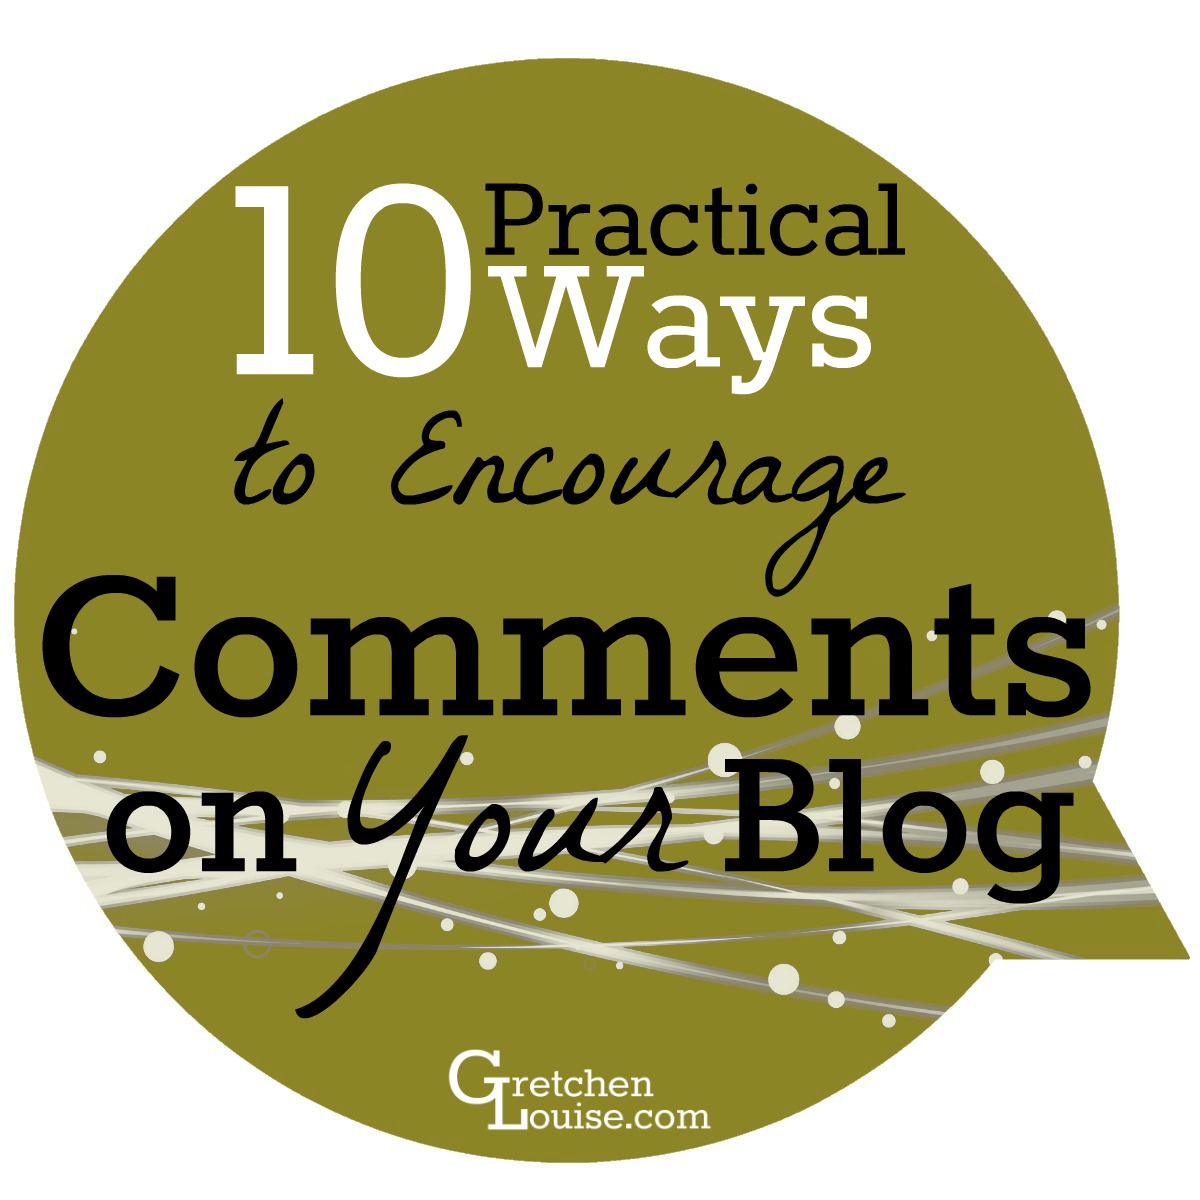 Want to encourage commenting on your blog posts? Check out these 10 super practical ways to streamline your comment section so it's easy to comment.